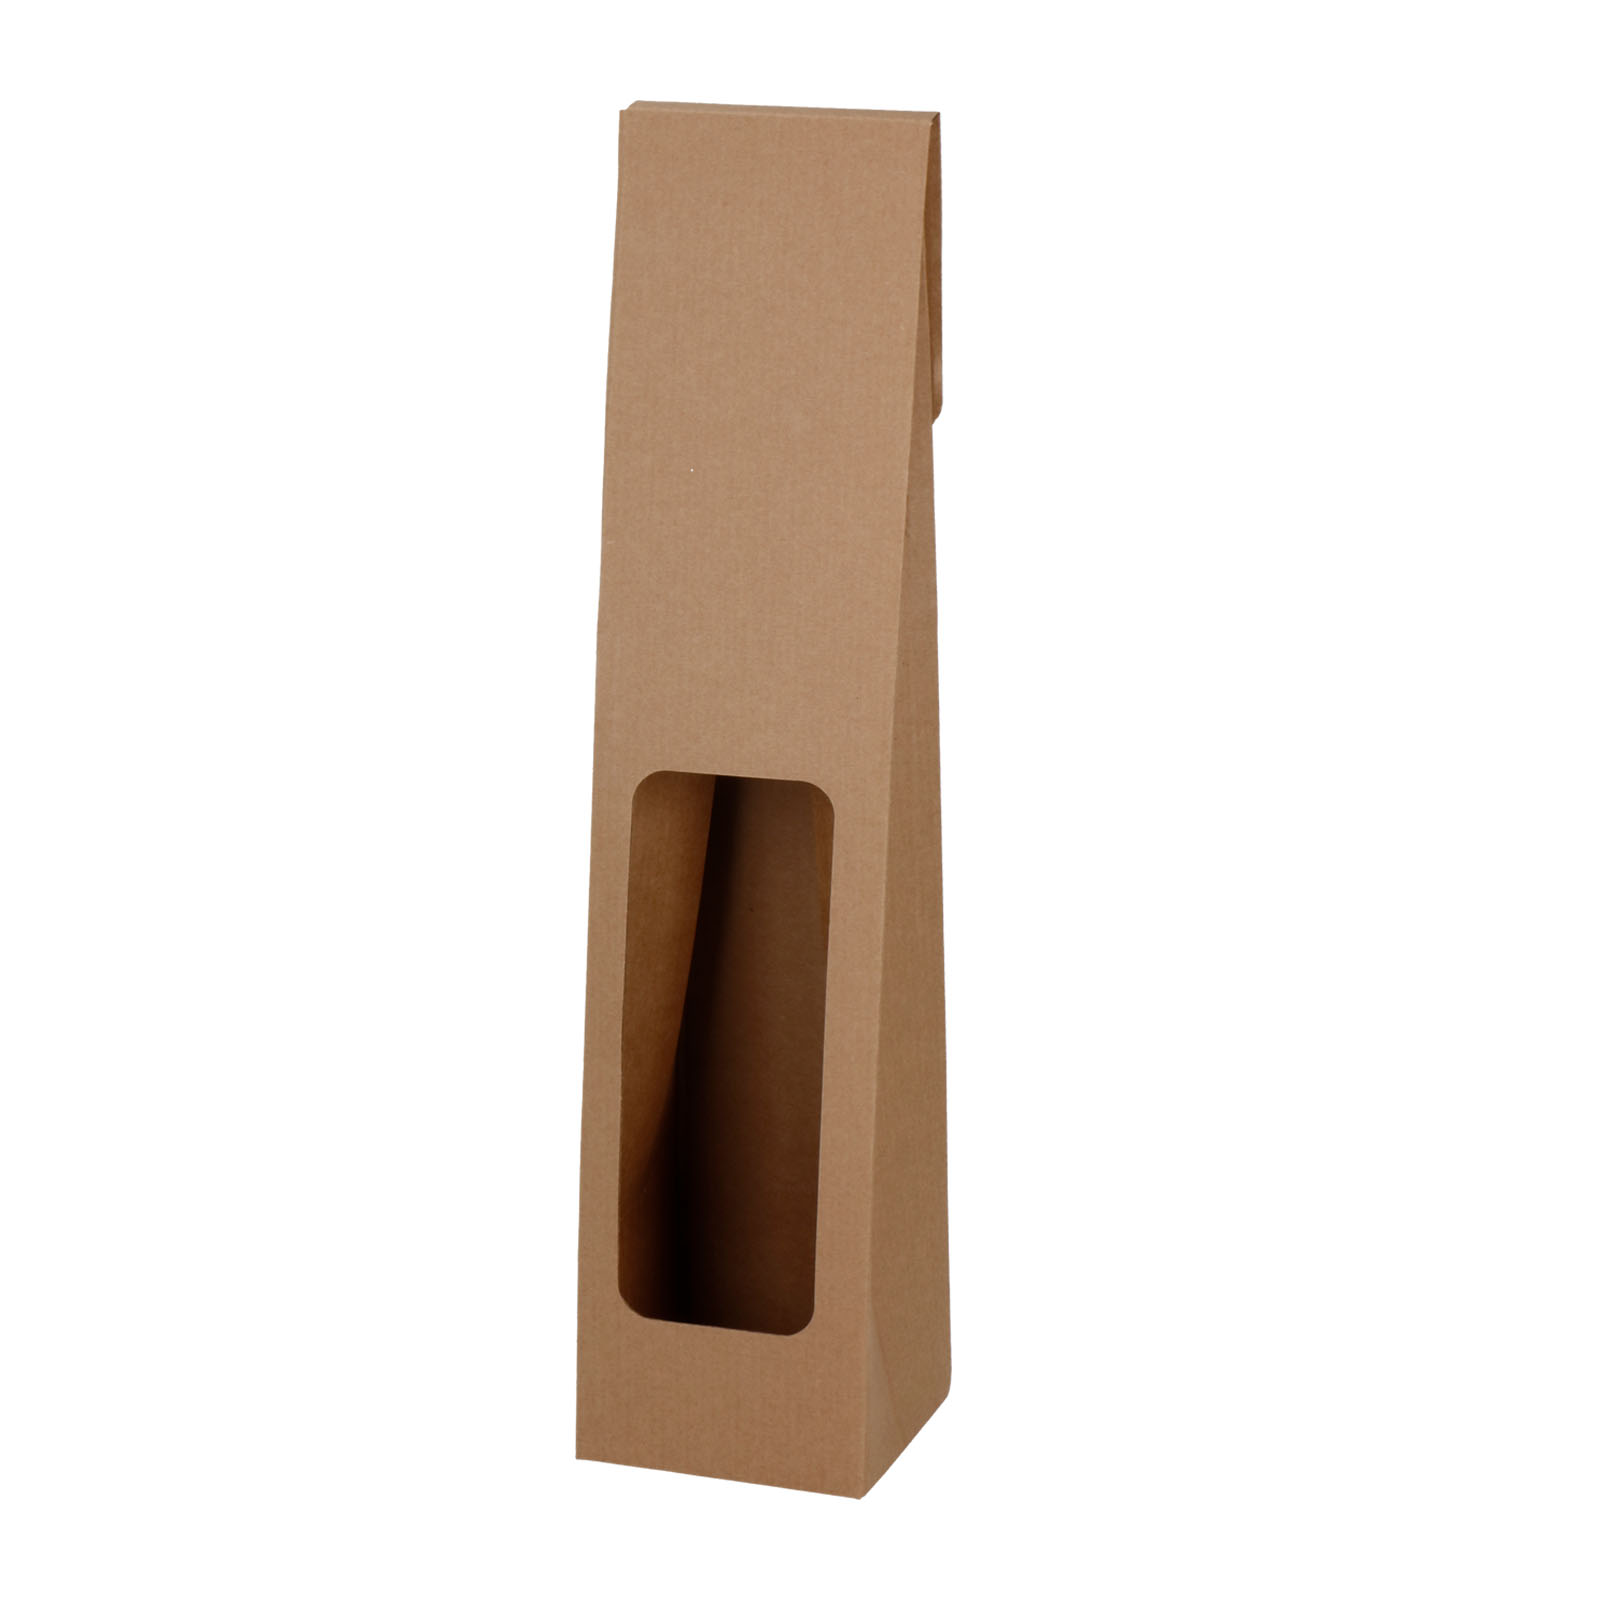 Box with window for 1 bottle, 85x85x330 mm